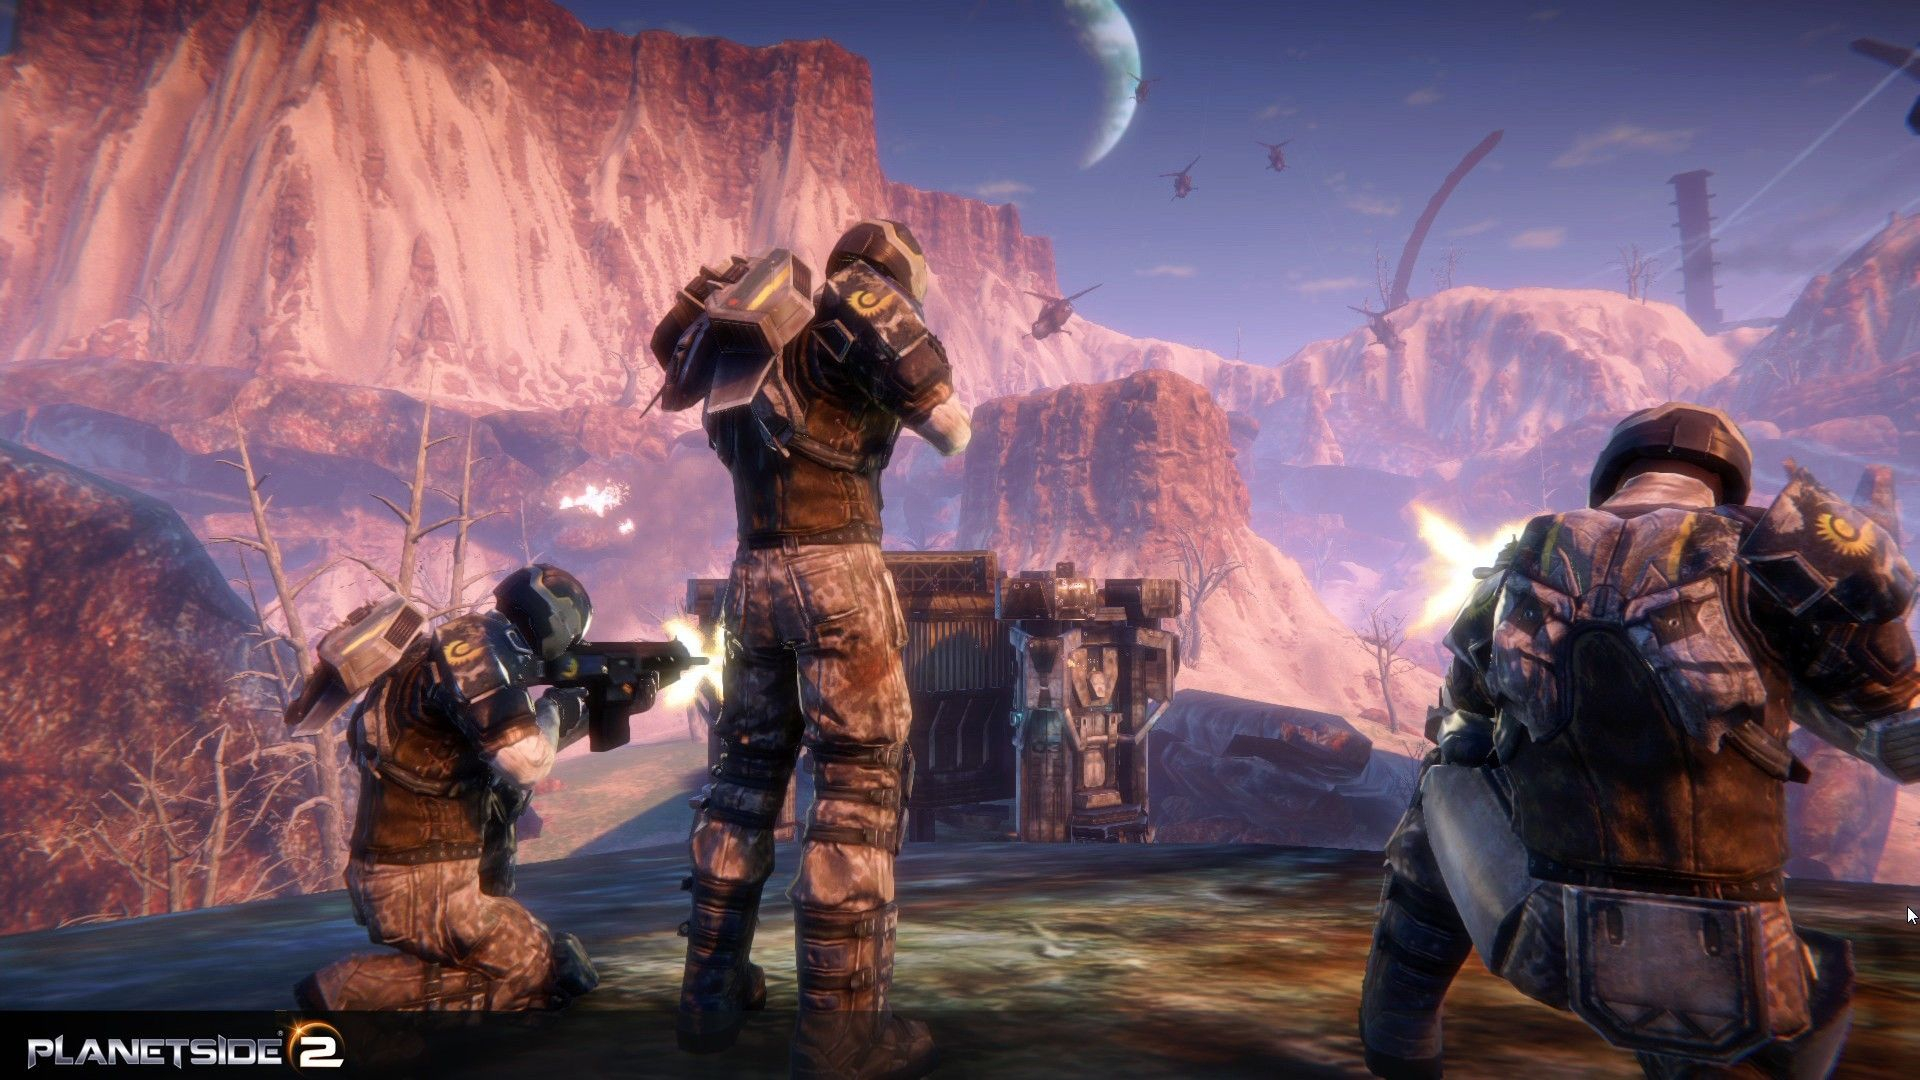 1920x1080 Soldiers video games planetside 2 wallpaper | Planetside 2, Video games, Games to play